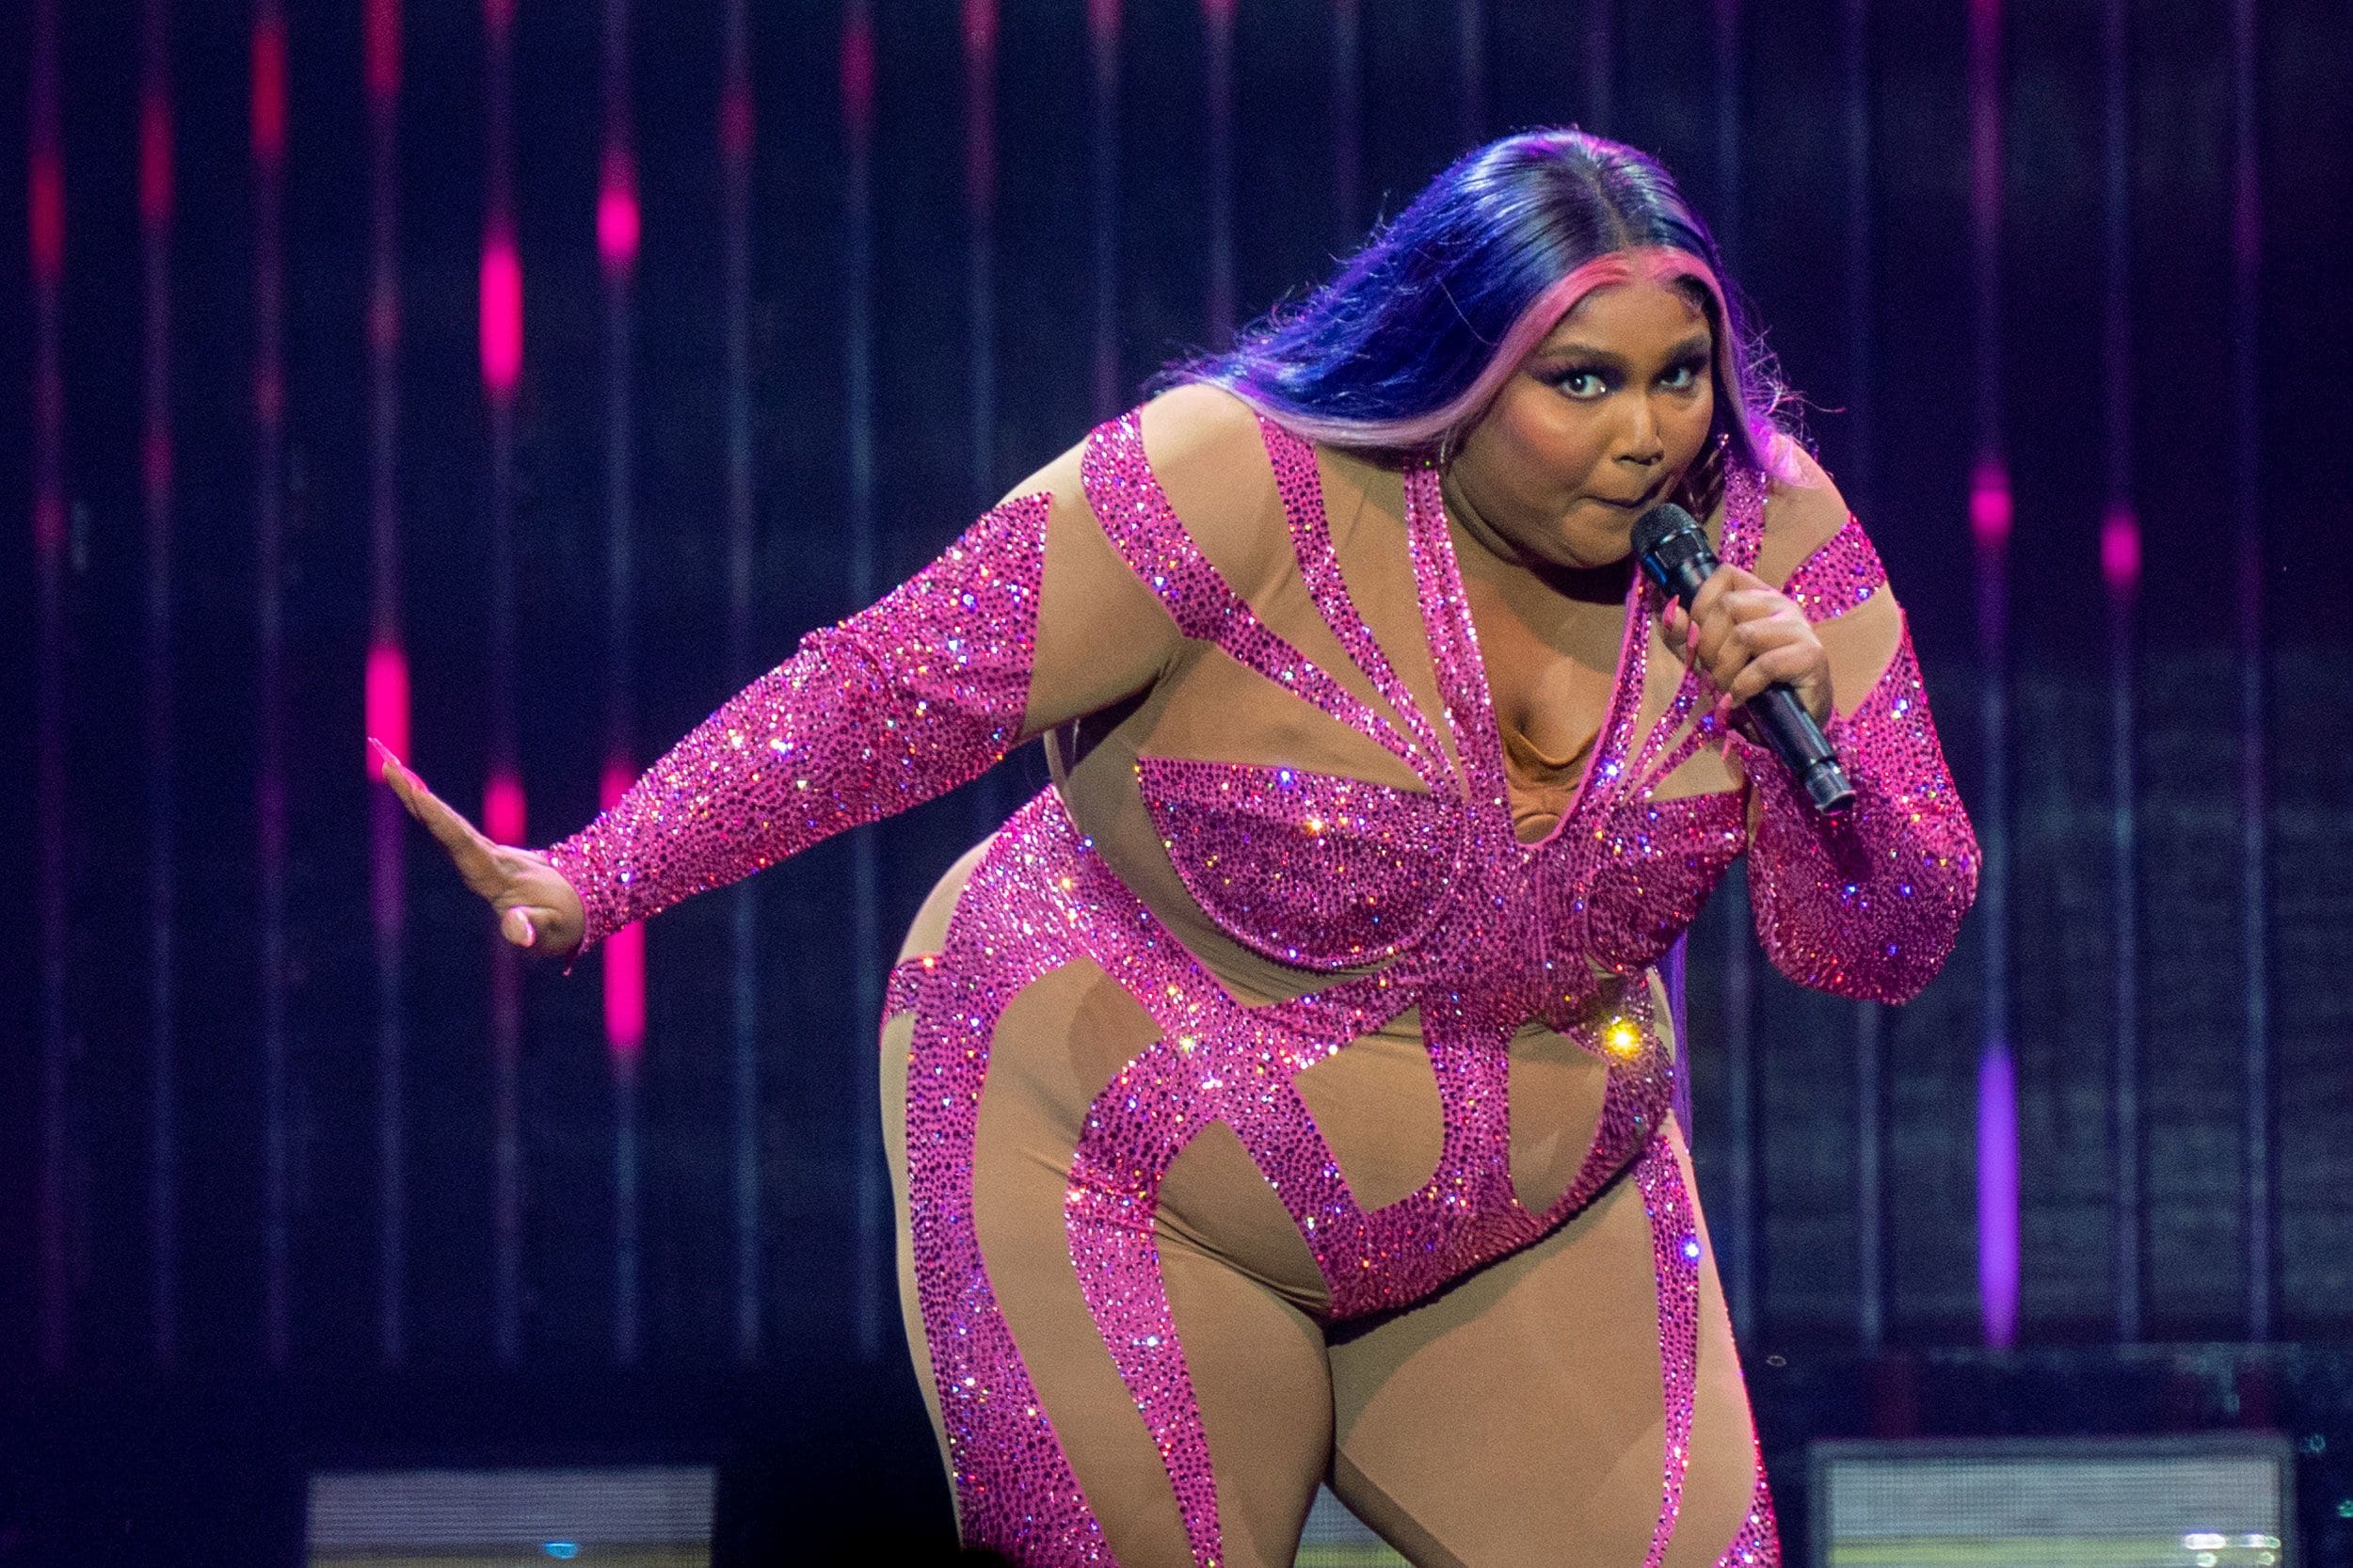 Lizzo Is Furious About Anti-Transgender Hate Spewed Online And She Went On An Epic Twitter Rant To Express Why [Photos]